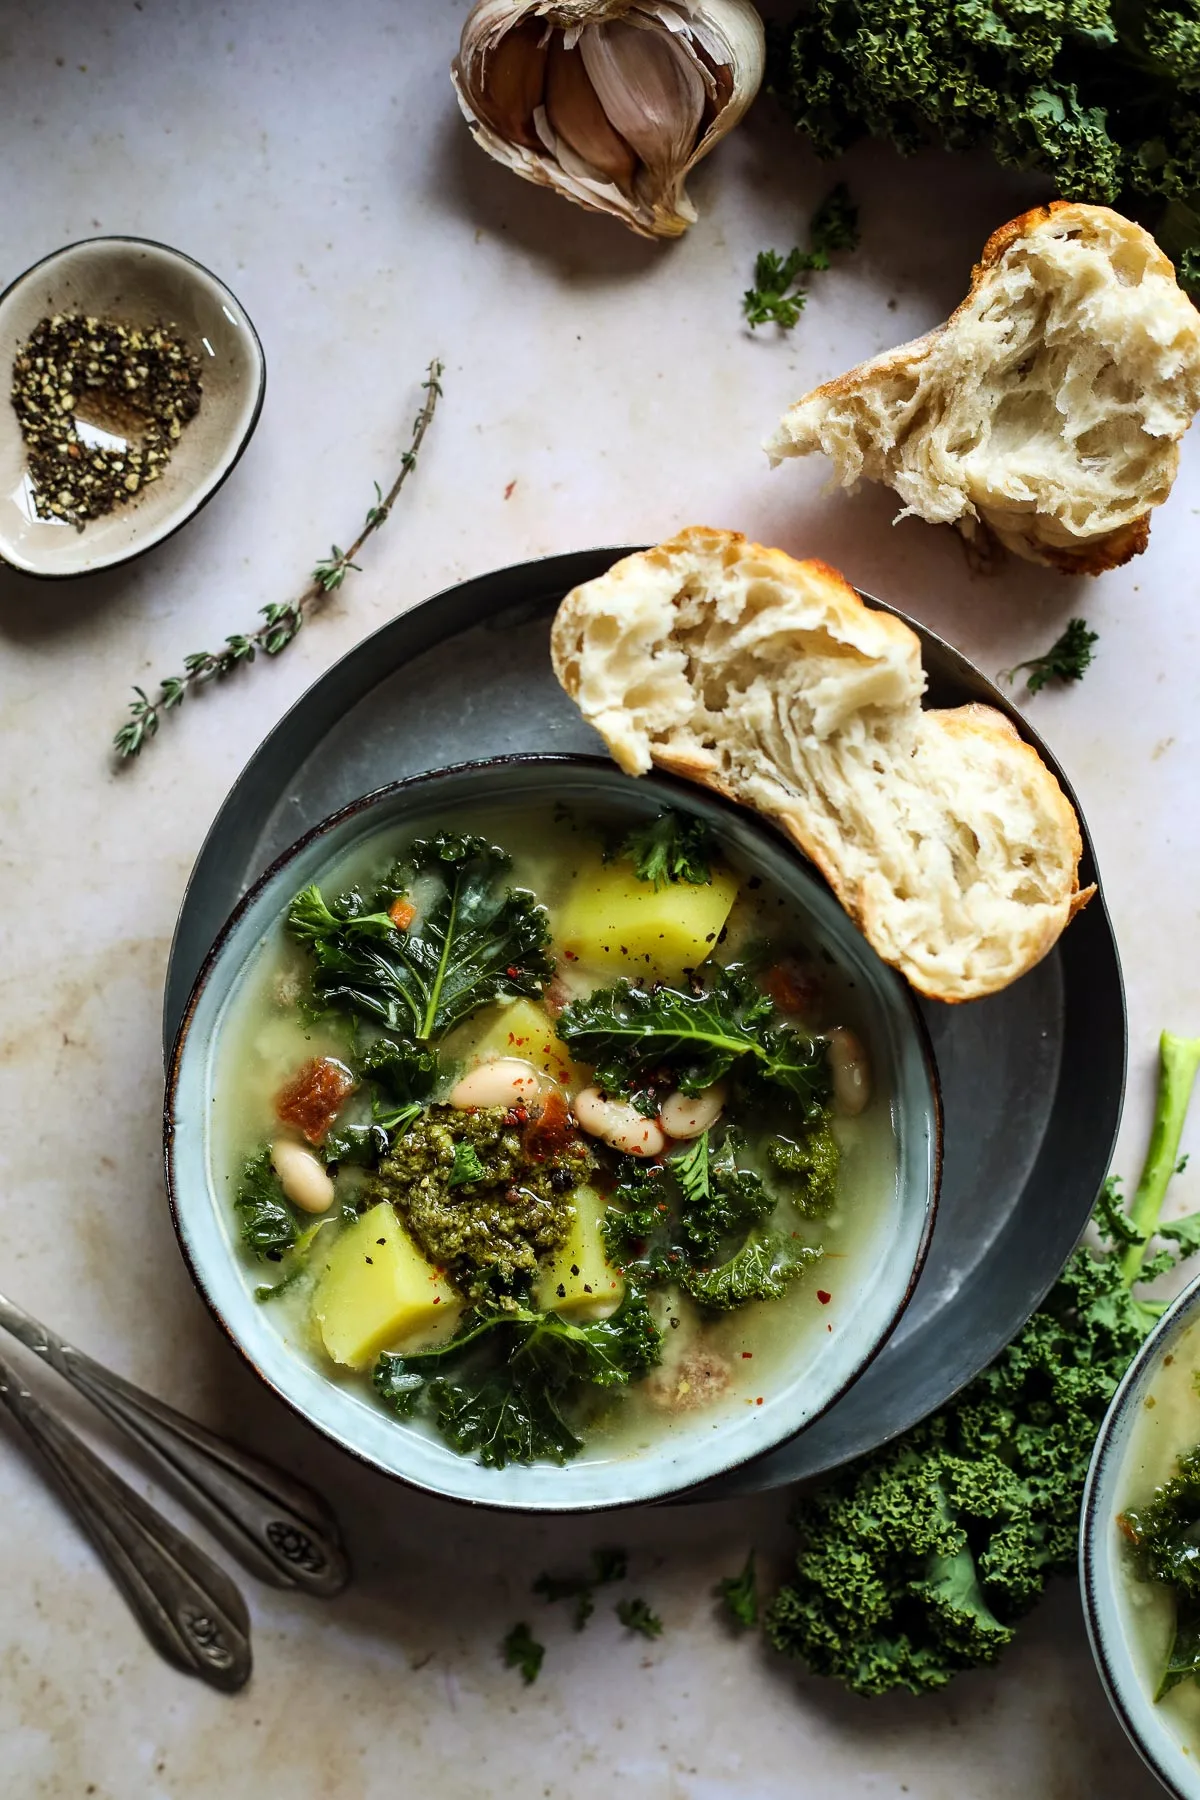 Kale Tuscan soup in a bowl with bread.